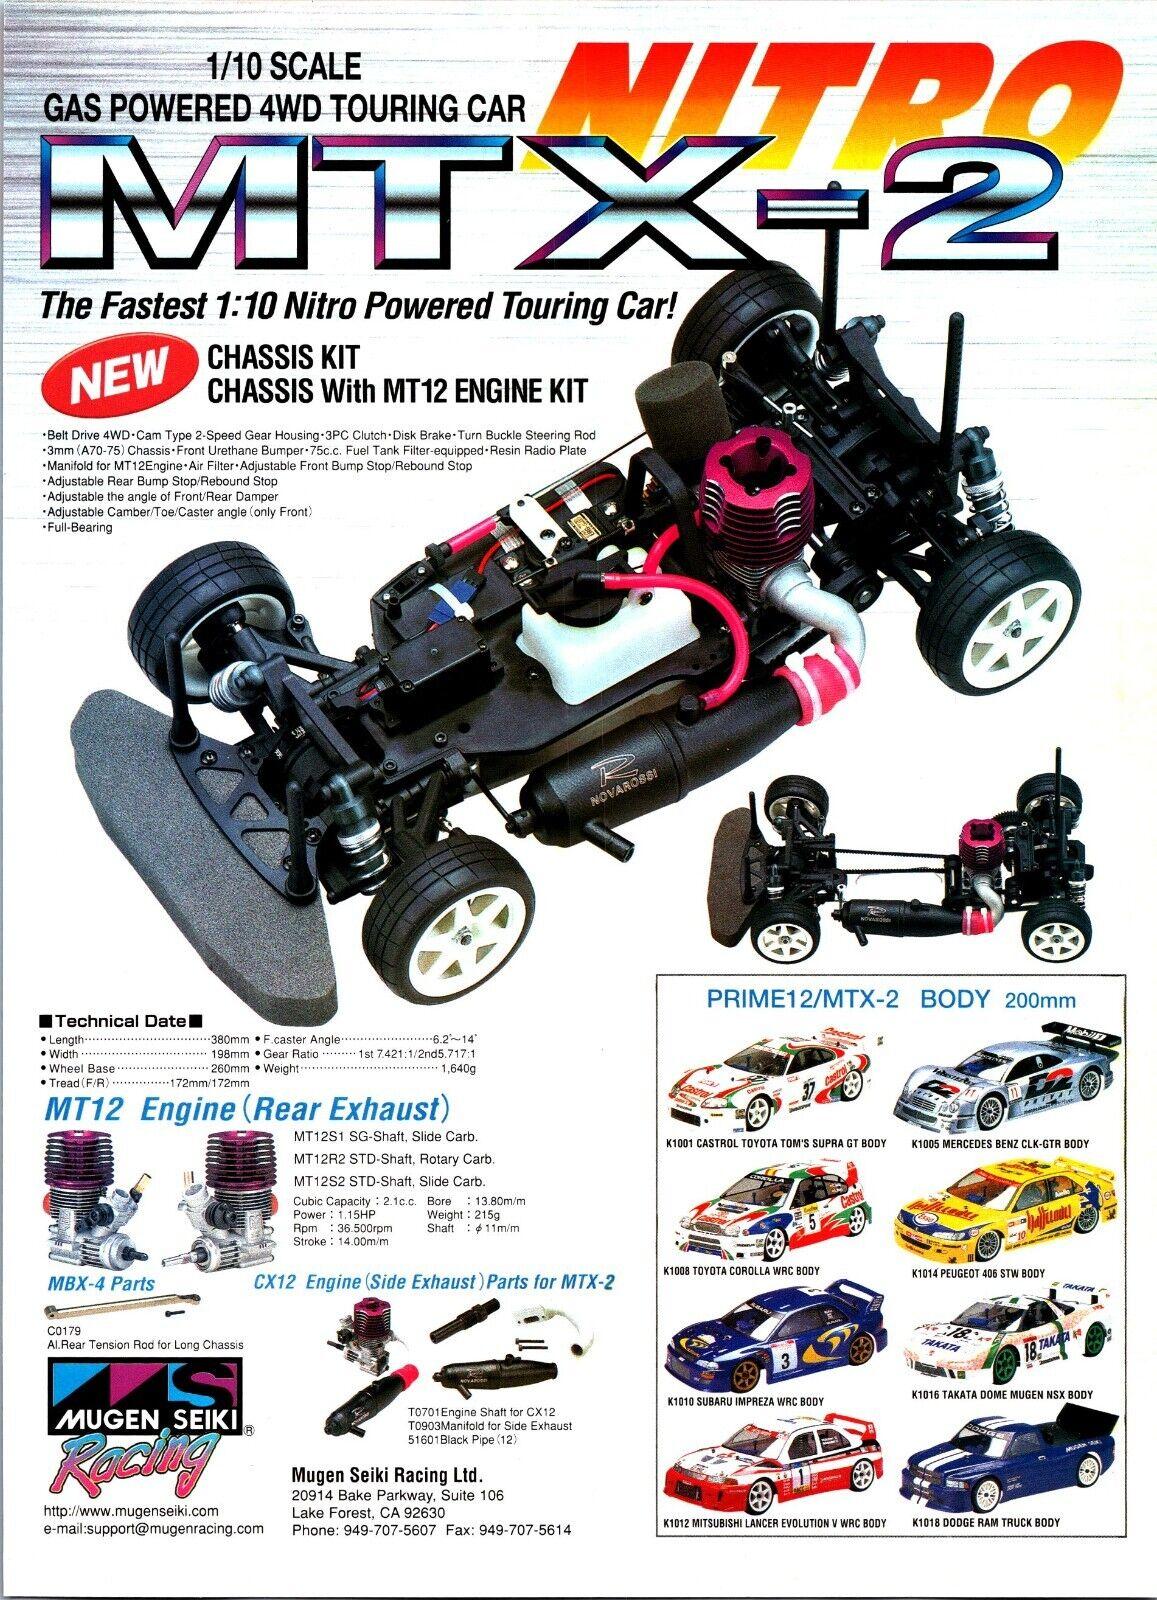 Mugen Rc Car: Safety is Key When Racing Mugen RC Cars